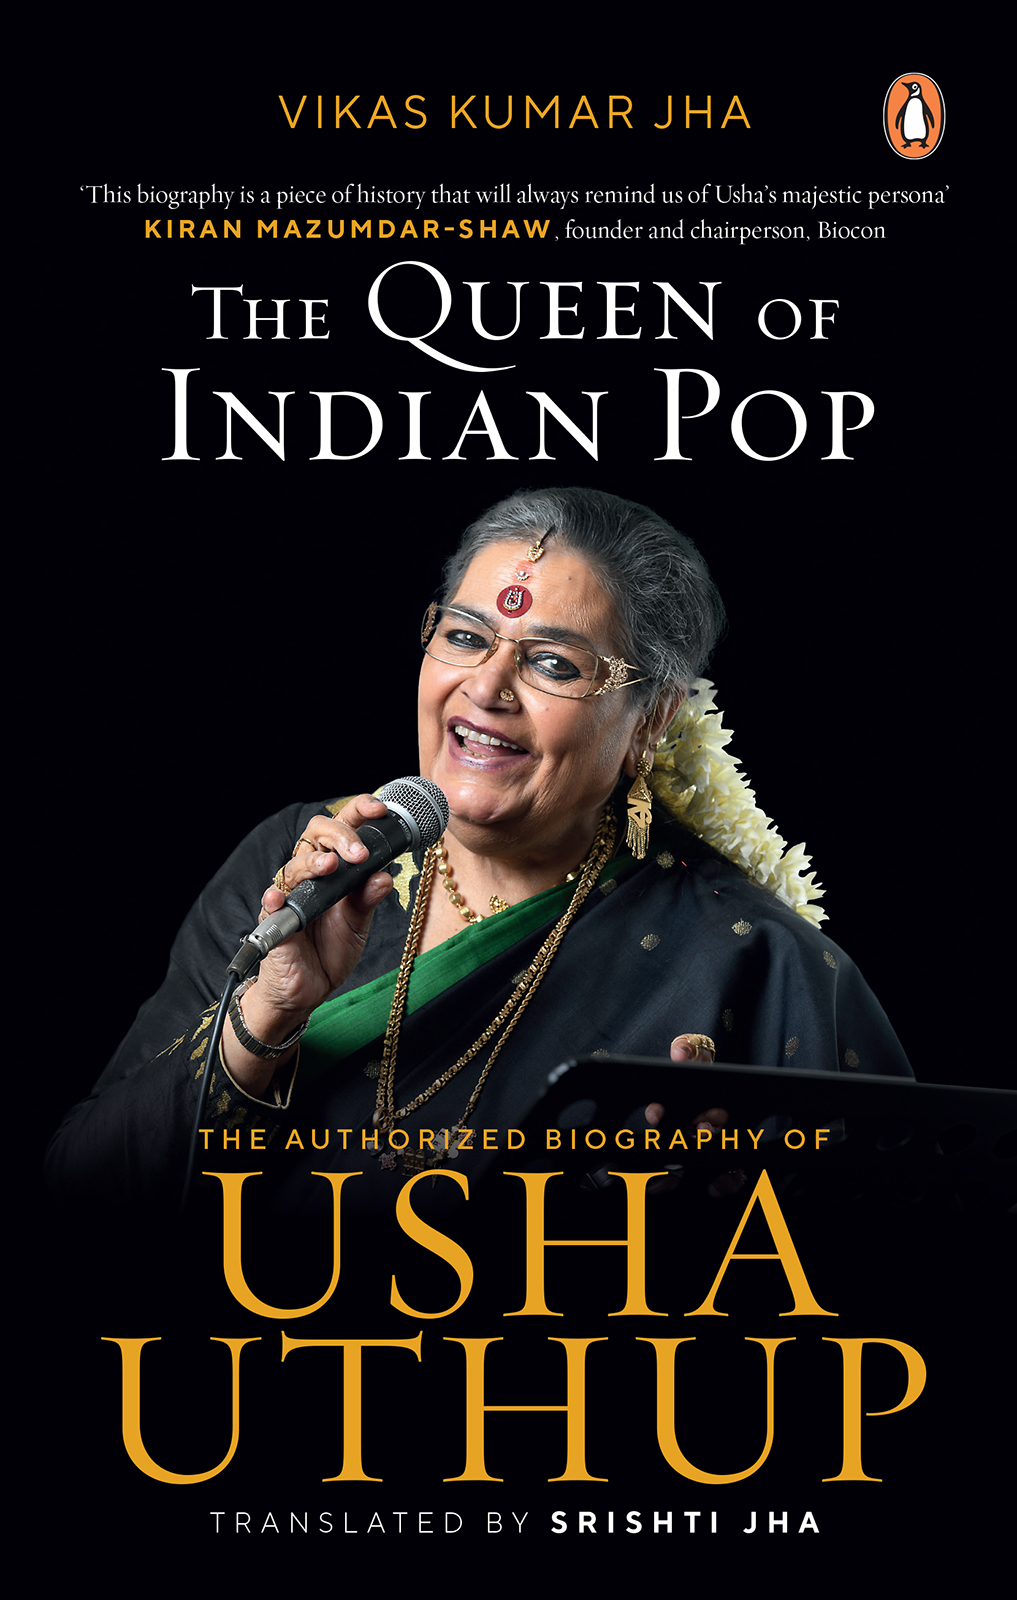 VIKAS KUMAR JHA THE QUEEN OF INDIAN POP The Authorized Biography - photo 1